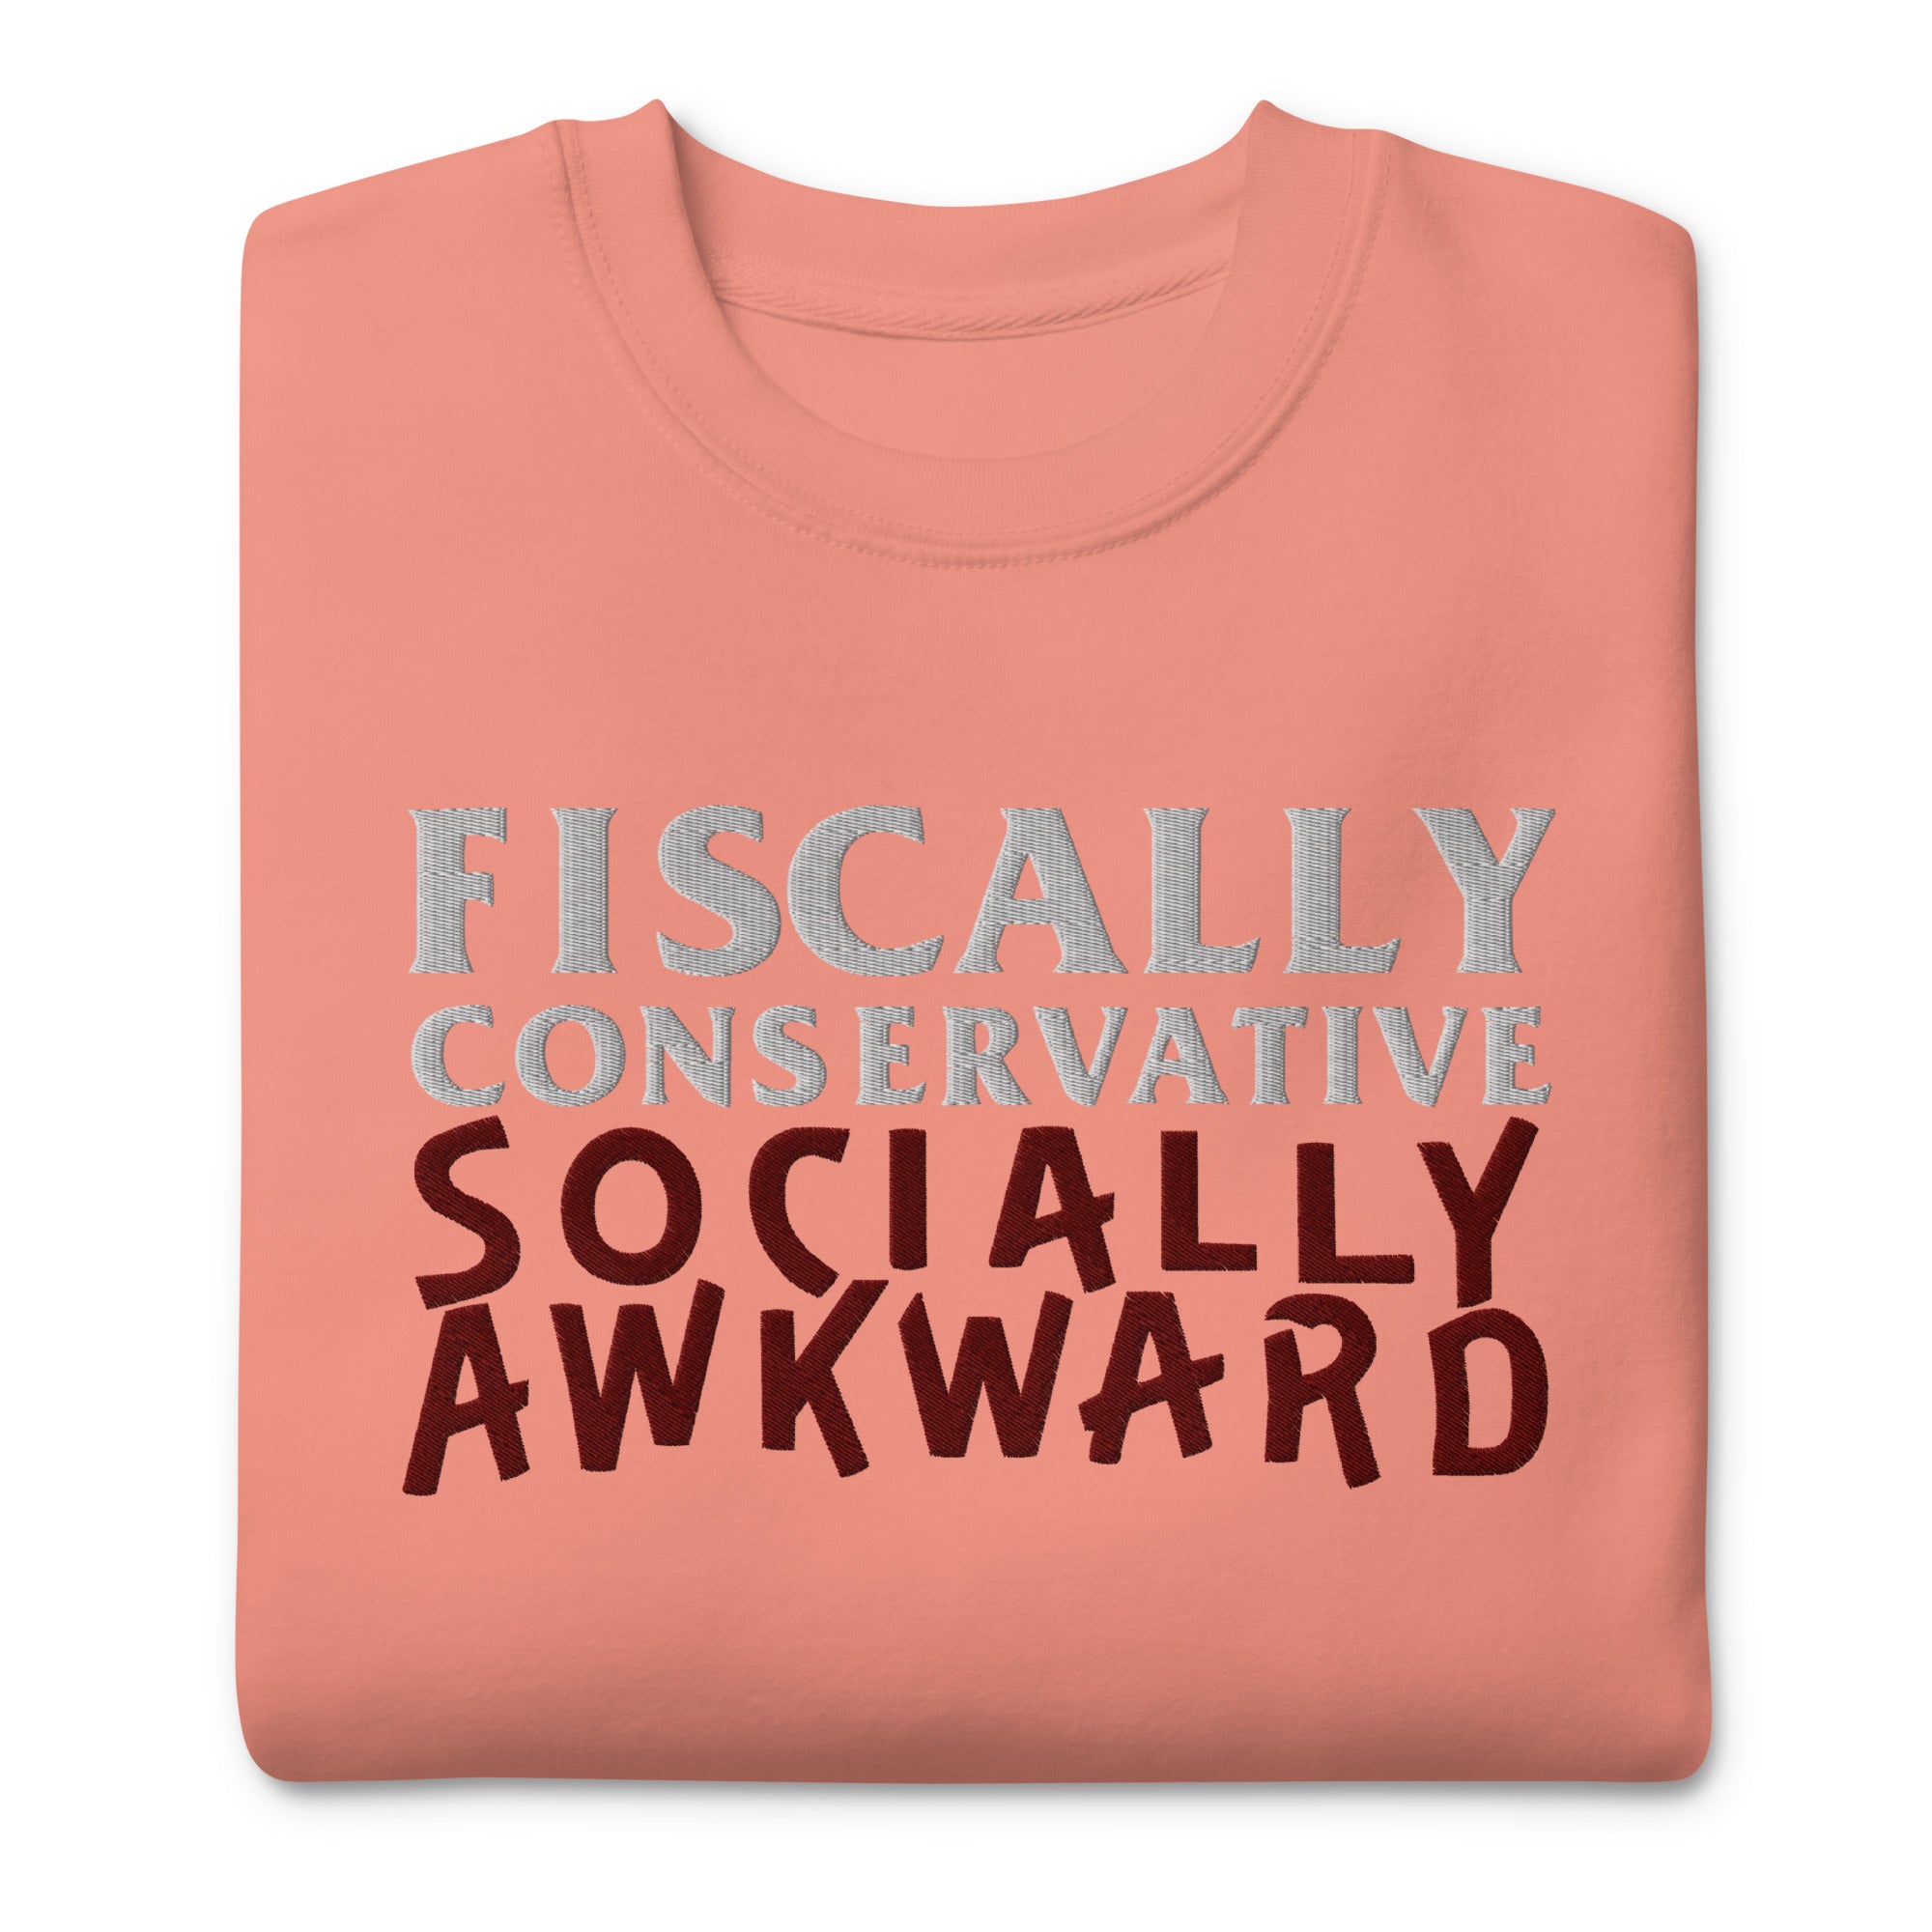 Fiscally Conservative Socially Awkward Crewneck Embroidered Sweatshirt